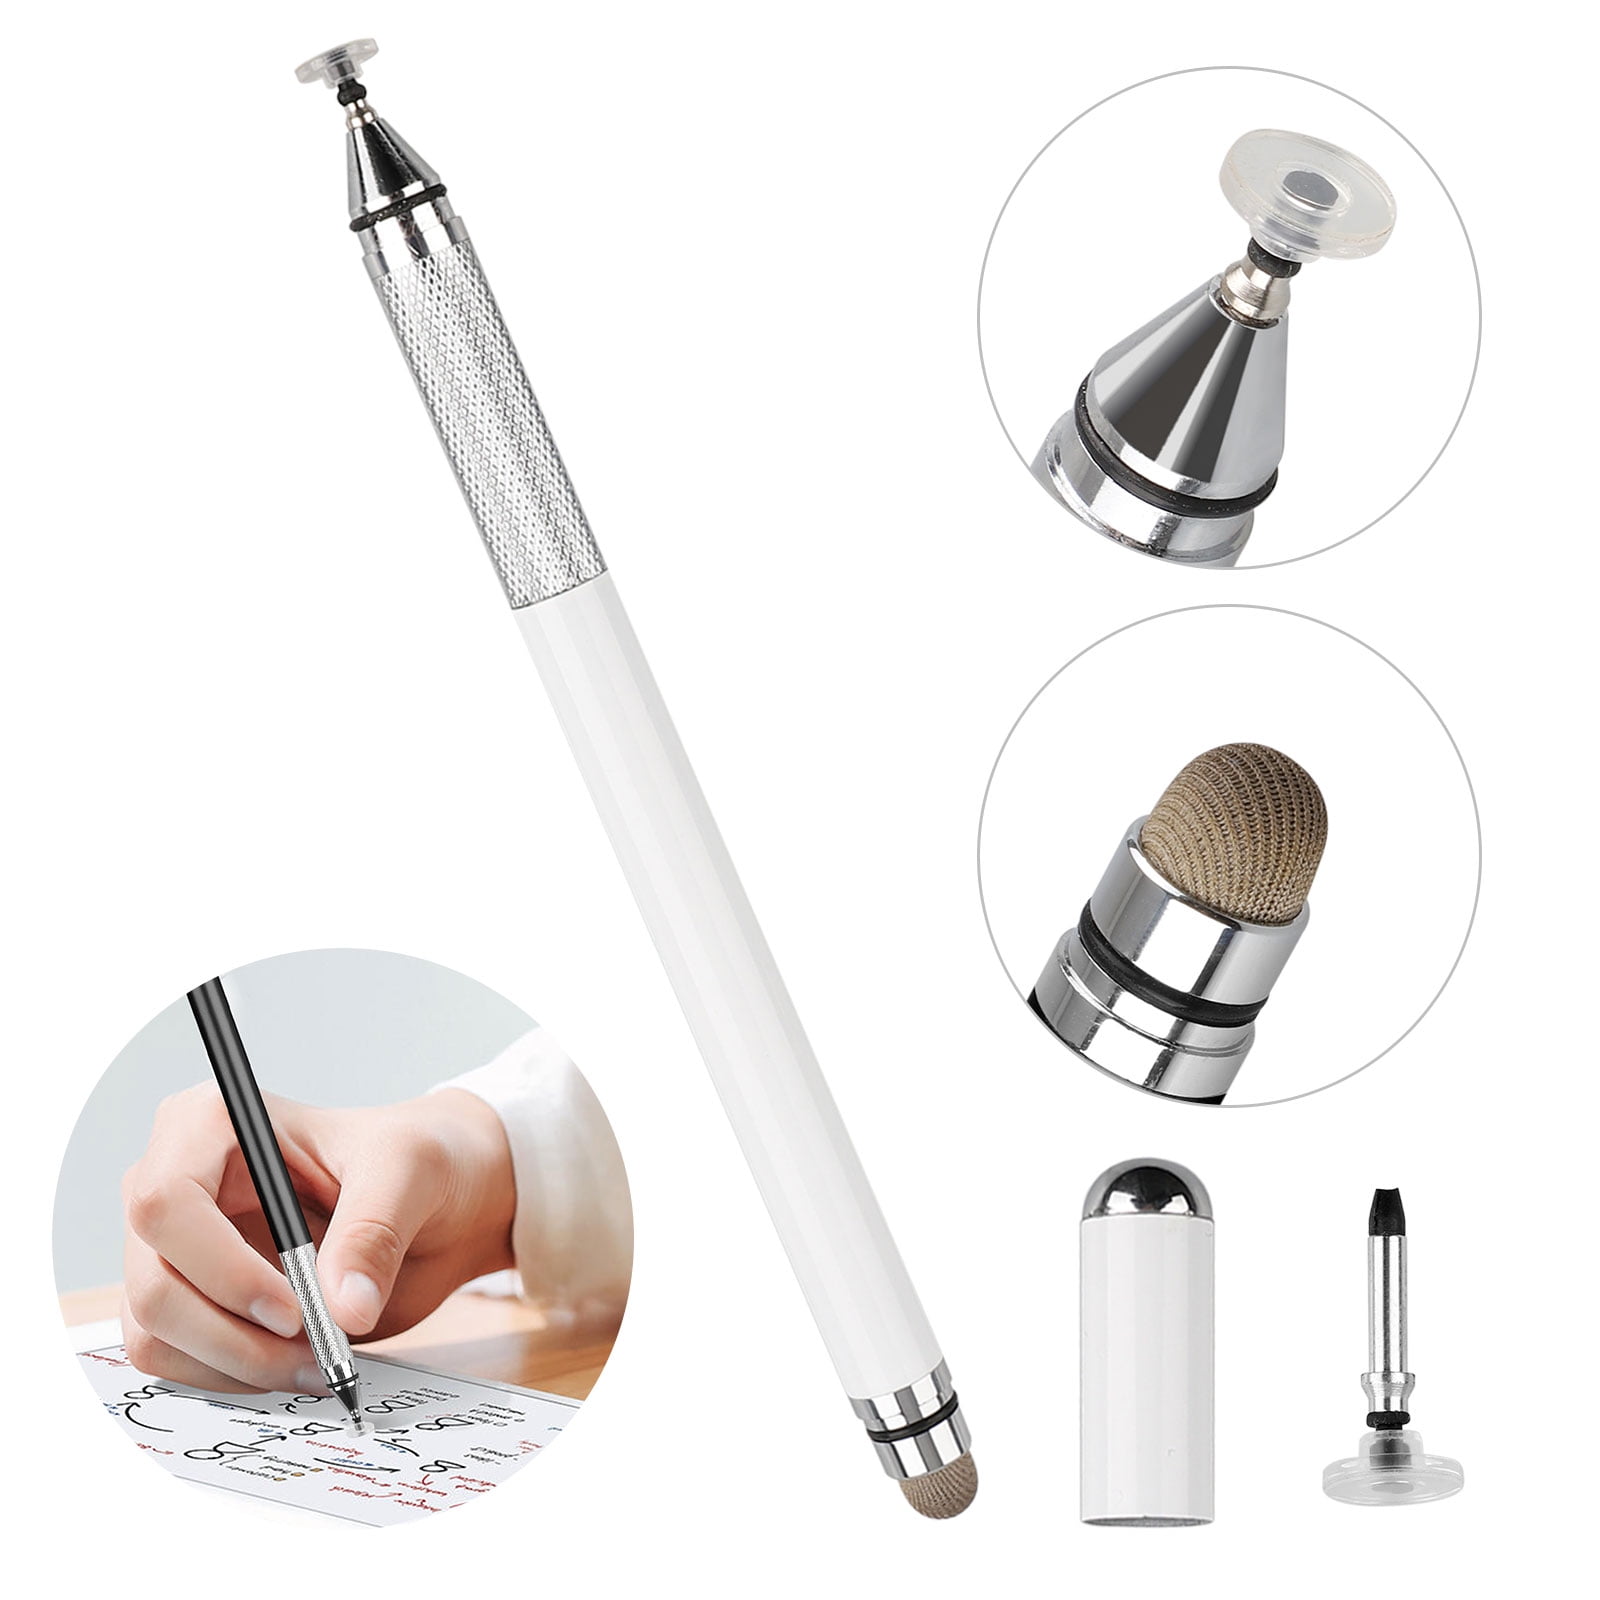 2 Pack 3 in 1 Ball Pen Capacitive Stylus Touch Screen Pen LED light iPhone iPad 